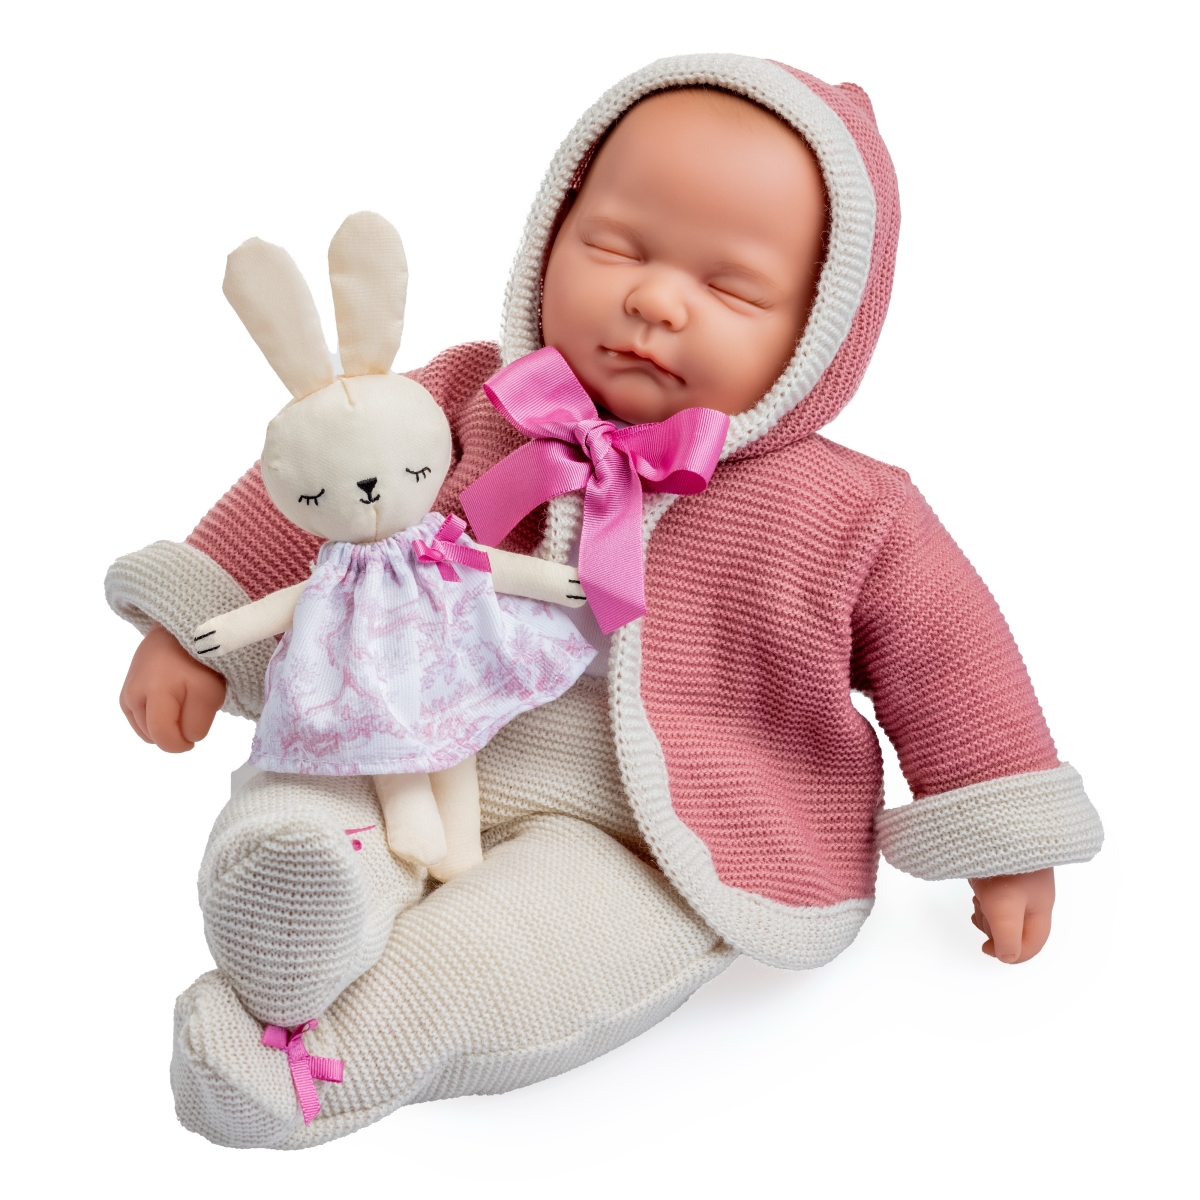 Picture of JC Toys 15200 La Baby Soft Body Weighted Doll Outfit with Accessories, Pink - 17 in.